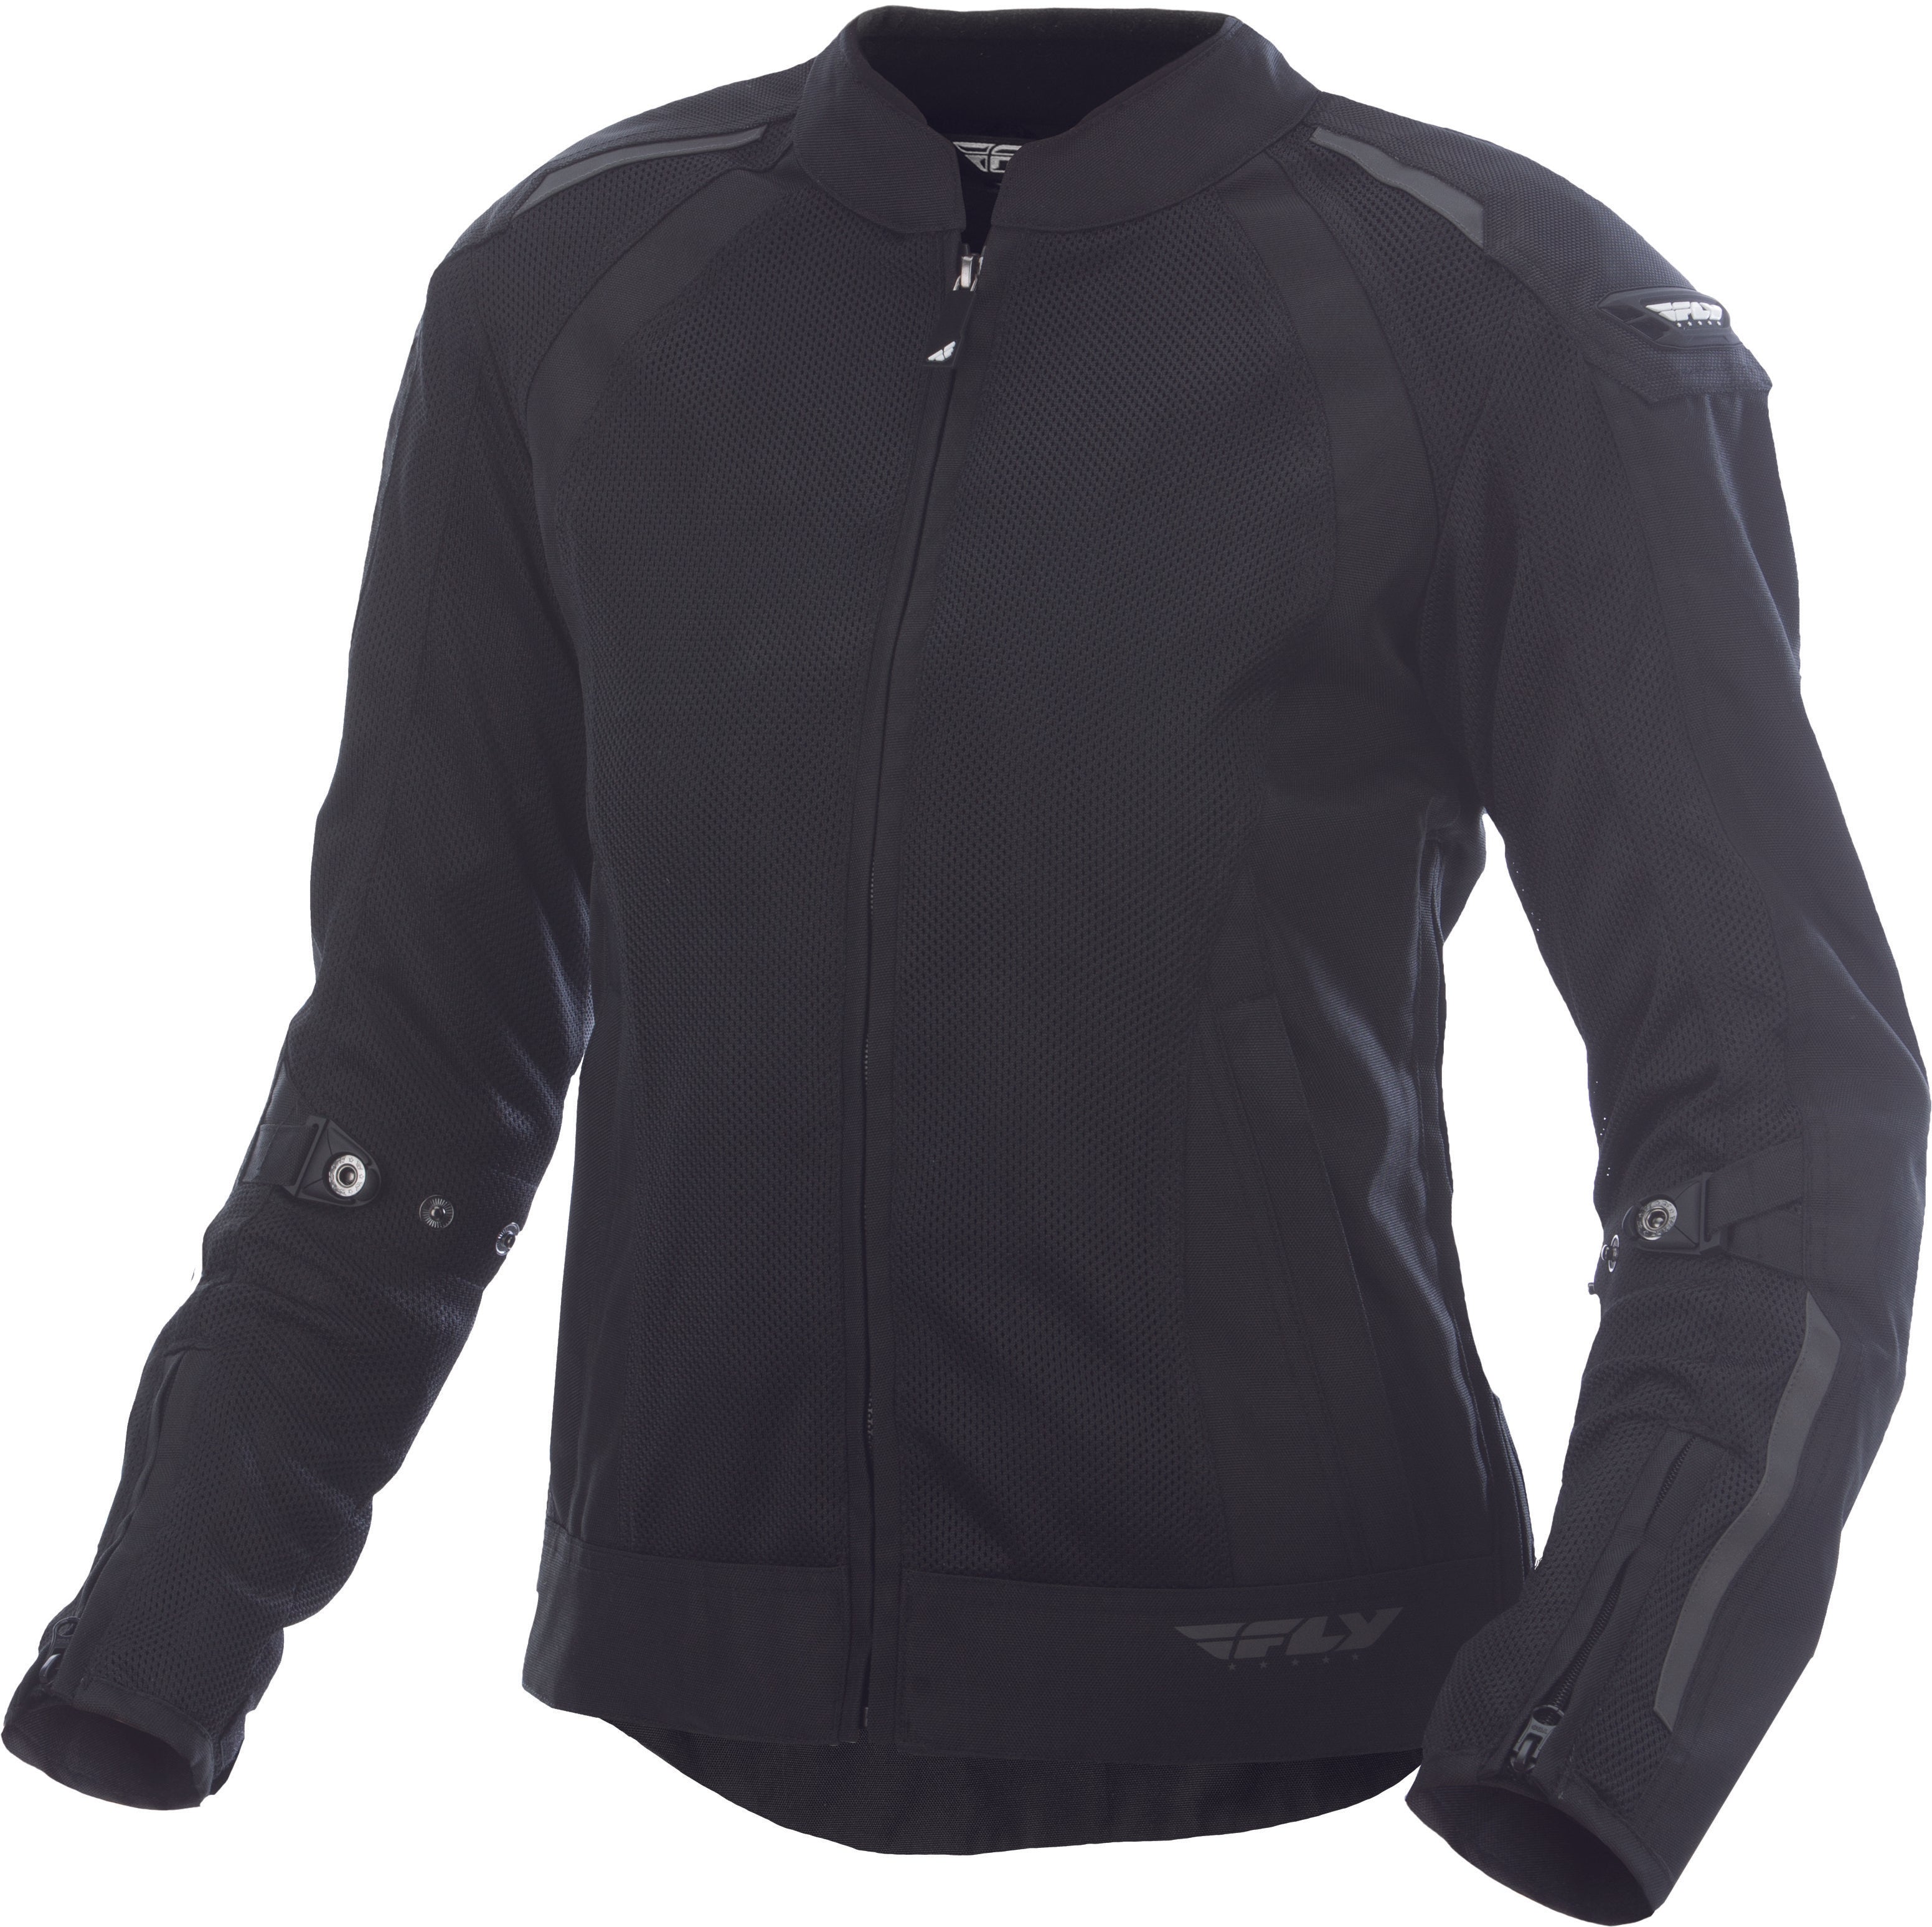 Fly Racing Women'S Coolpro Jacket Black 3X-Large 477-8050-7